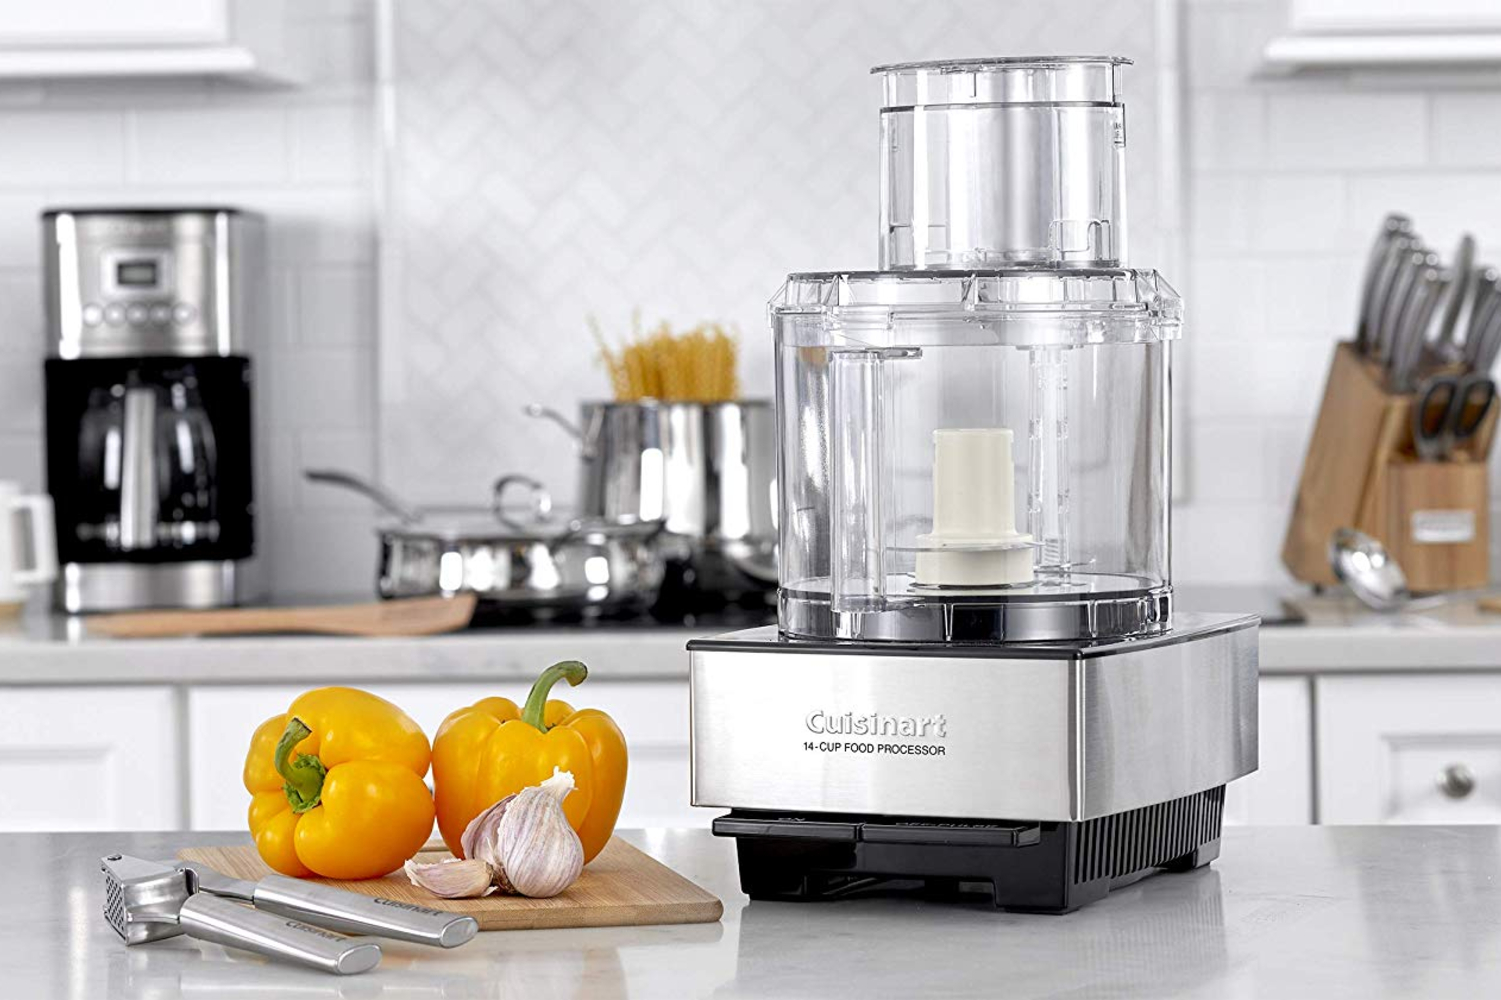 https://www.digitaltrends.com/wp-content/uploads/2019/10/cuisinart-dfp-14bcny-14-cup-food-processor-brushed-stainless-steel-silver-3-1.jpg?fit=1501%2C1000&p=1